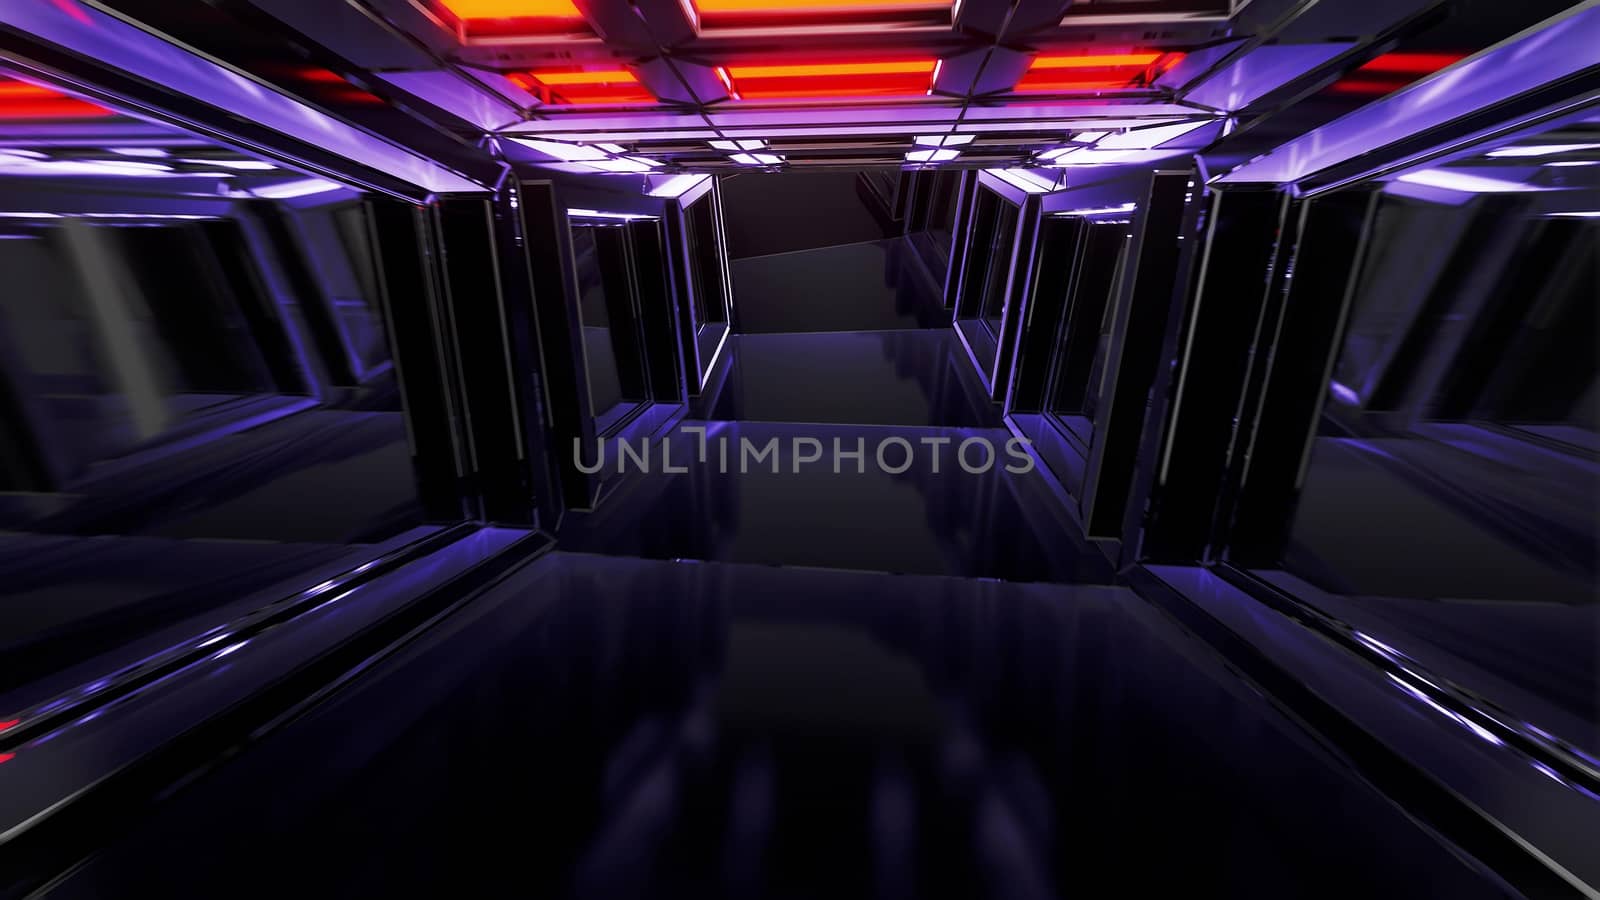 realistic glass tunnel corridor with wireframe contur 3d illustration wallpaper background by tunnelmotions